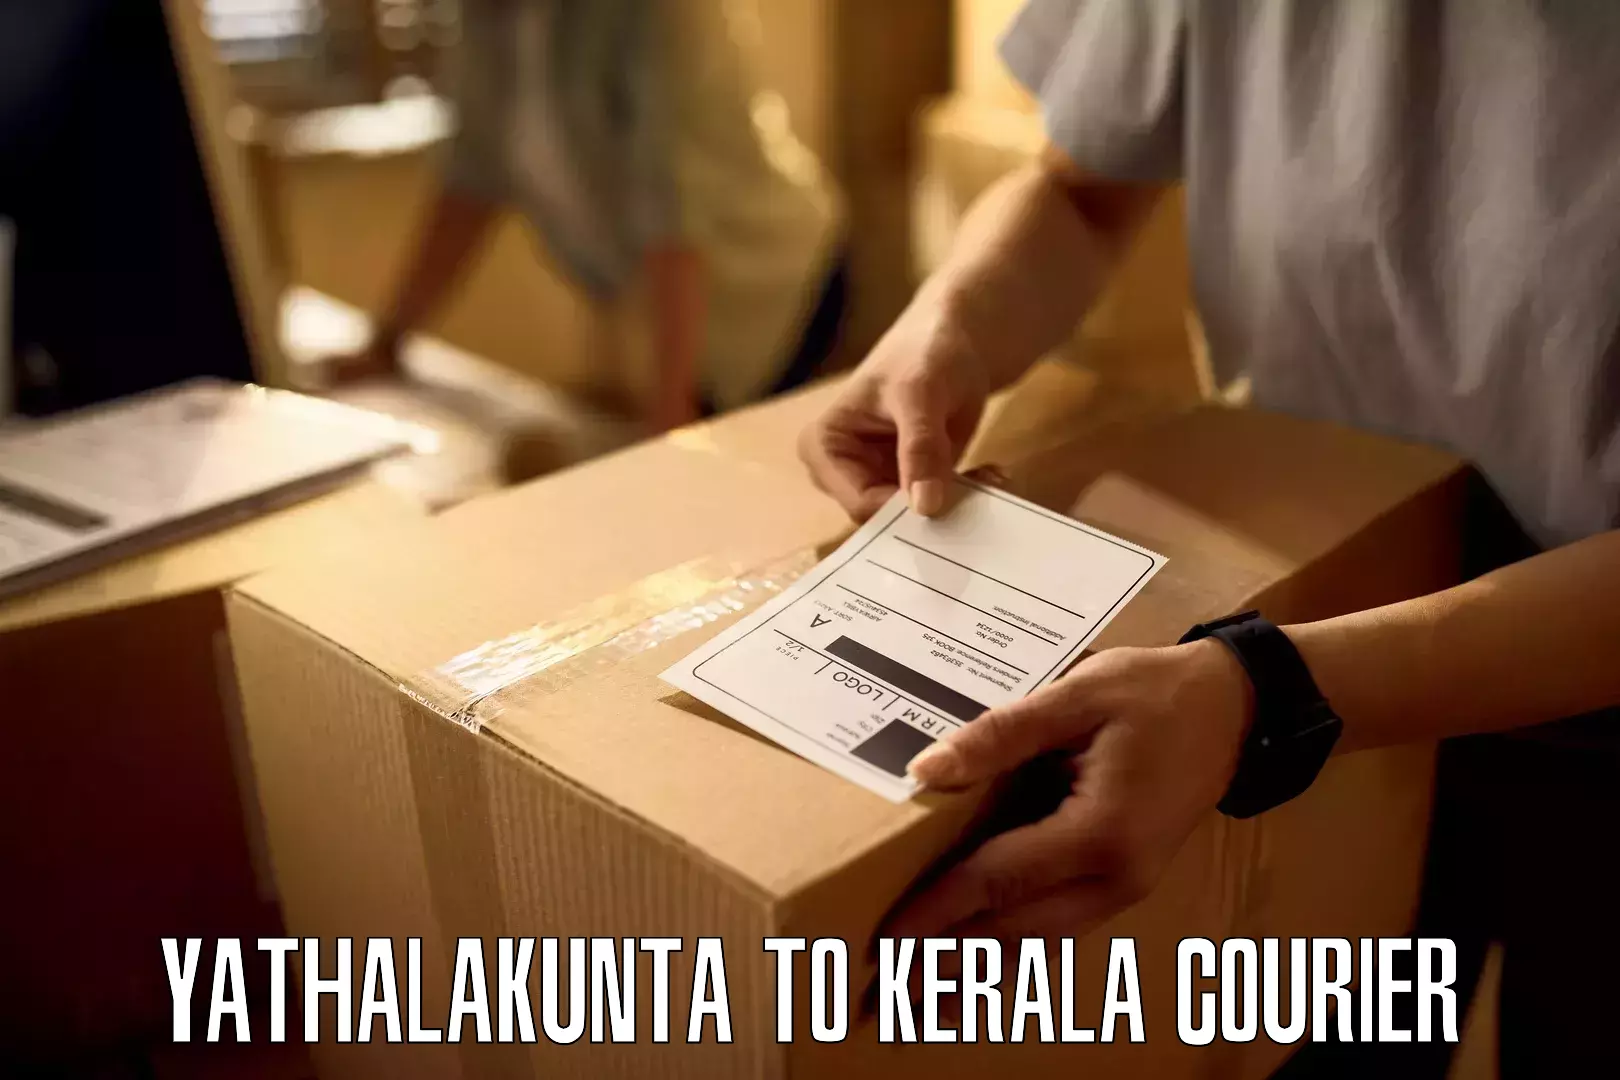 Courier service comparison Yathalakunta to Attingal